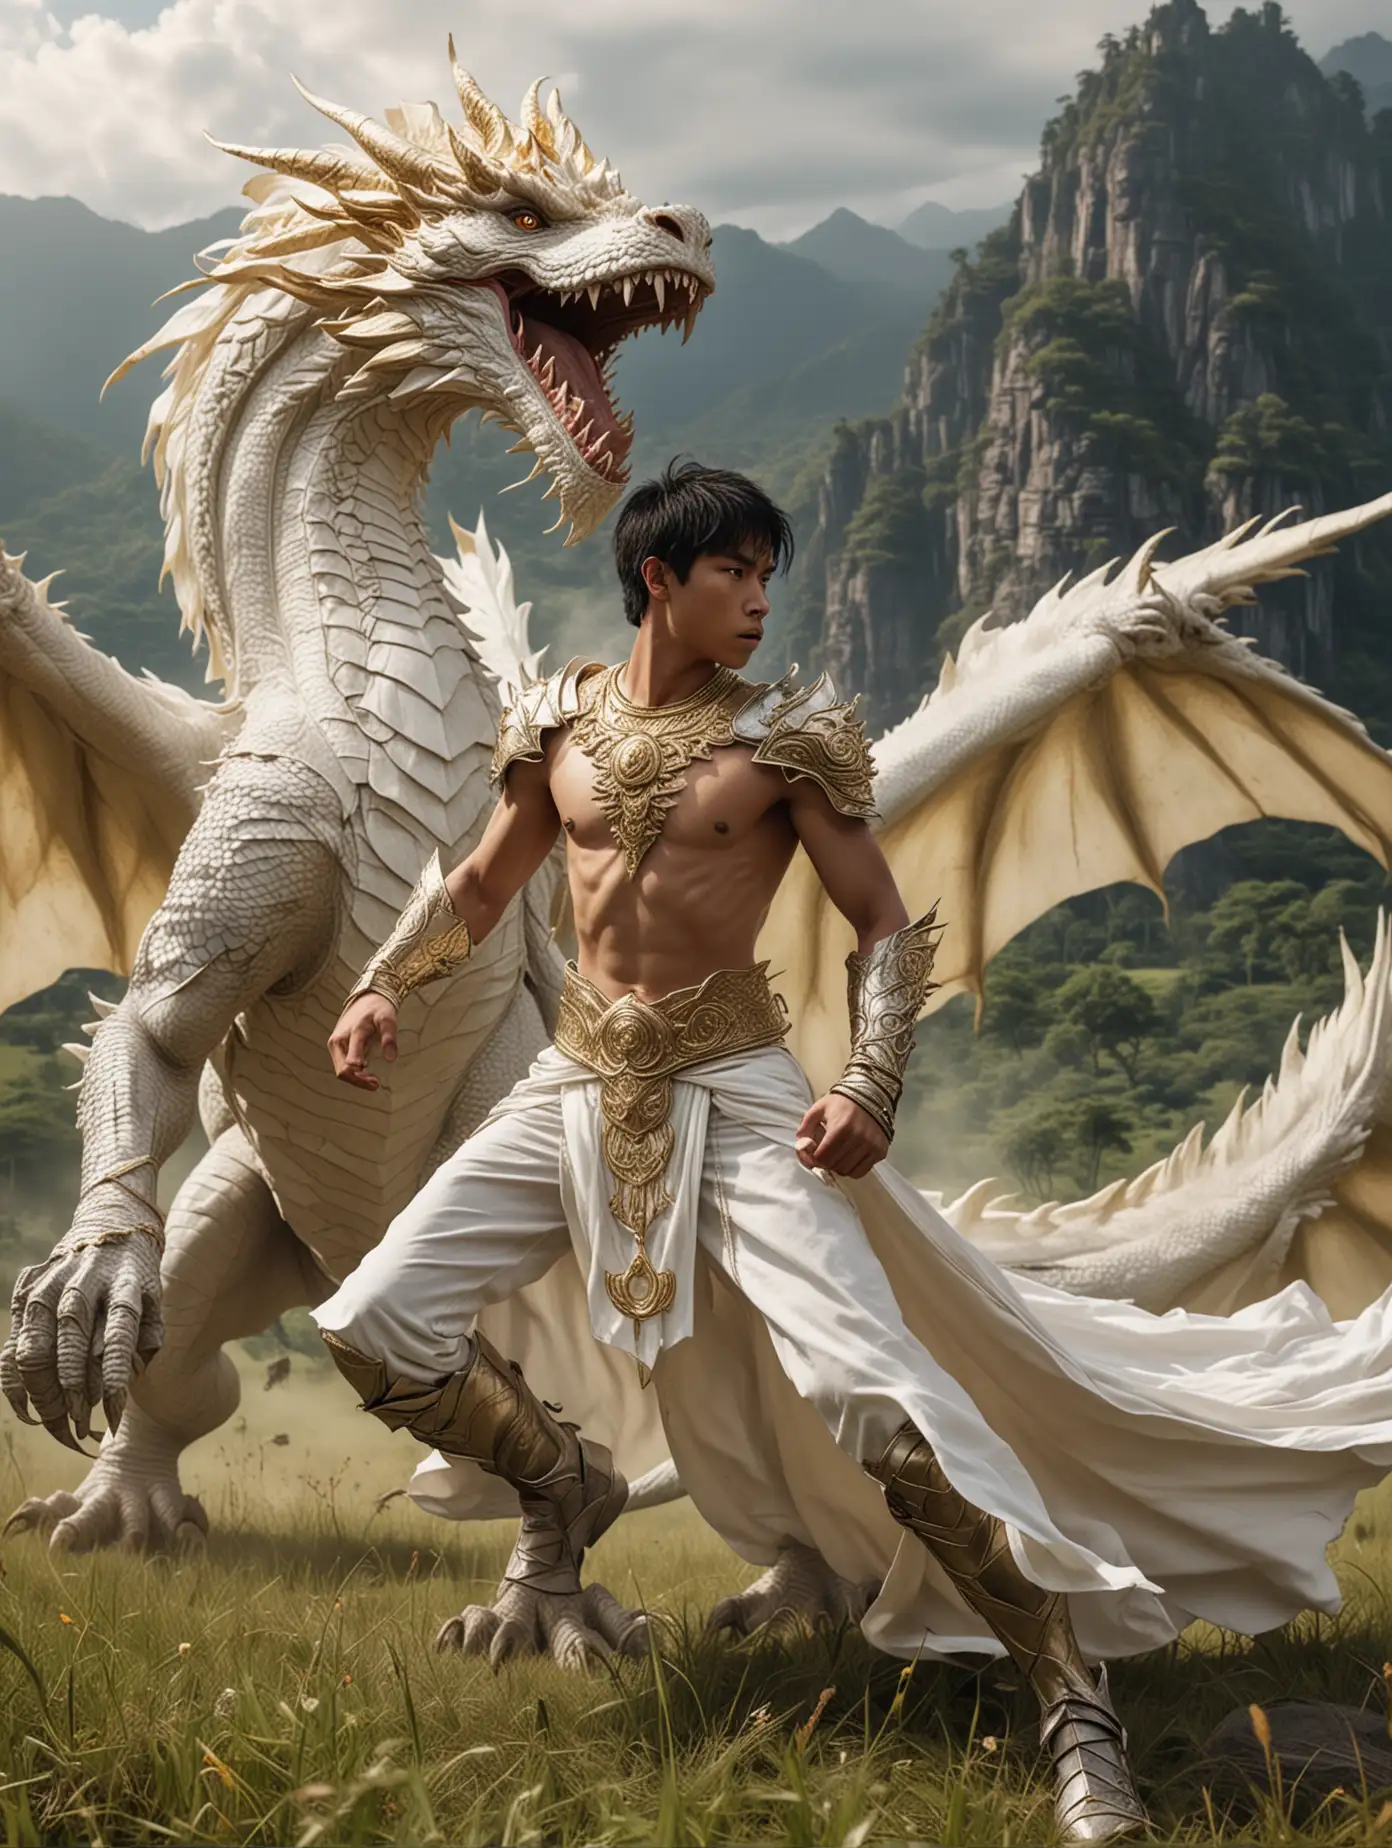 a bare-chested, white-skinned 15-year-old Indonesian male knight wearing white cloth and gold jewelry fights a giant white dragon in the grassland under the mountain